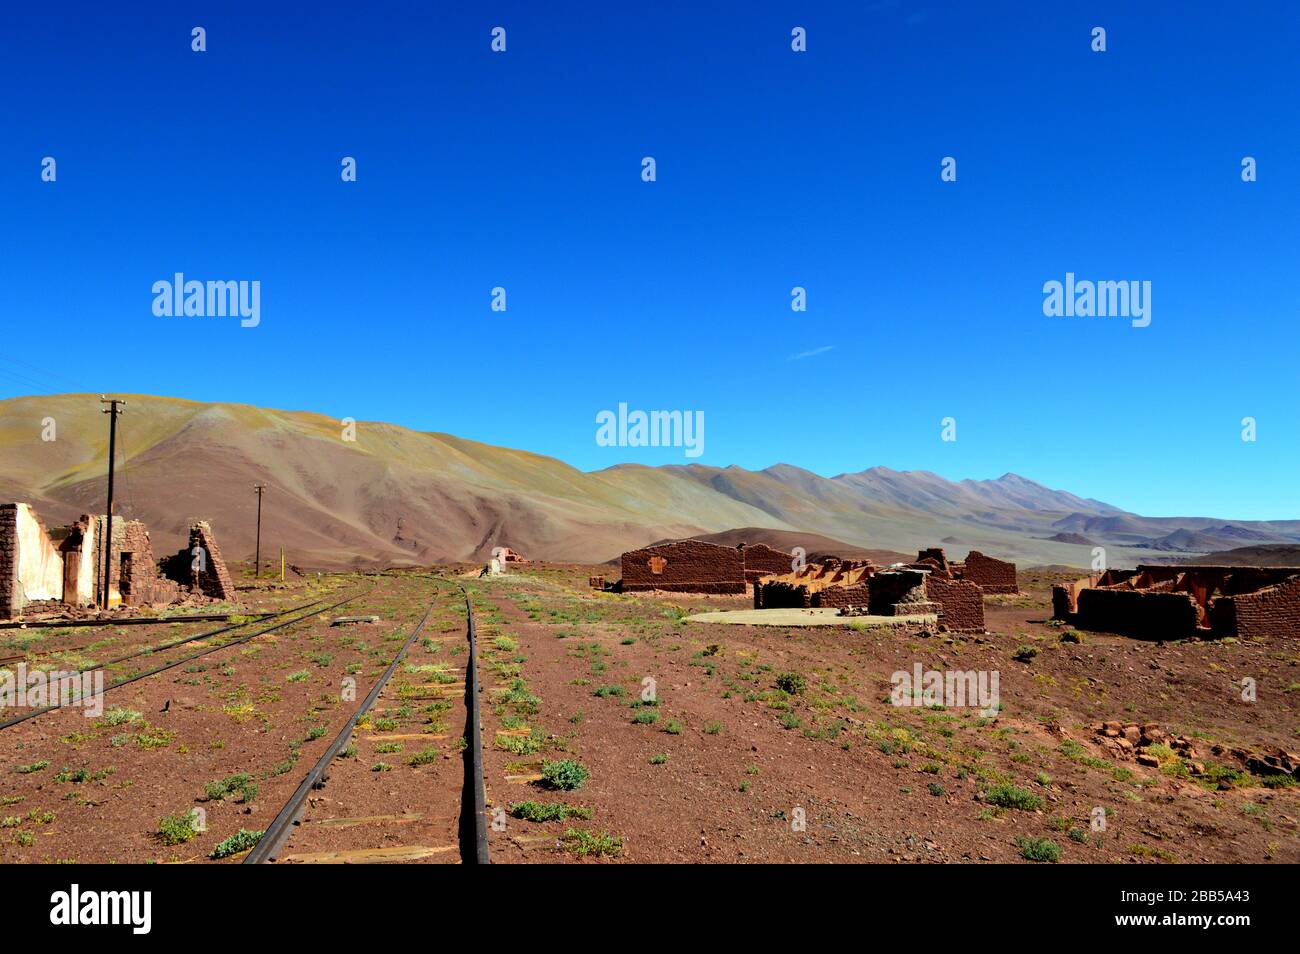 Old KM 1506 train station, train to the clouds, Salta, Argentina Stock Photo